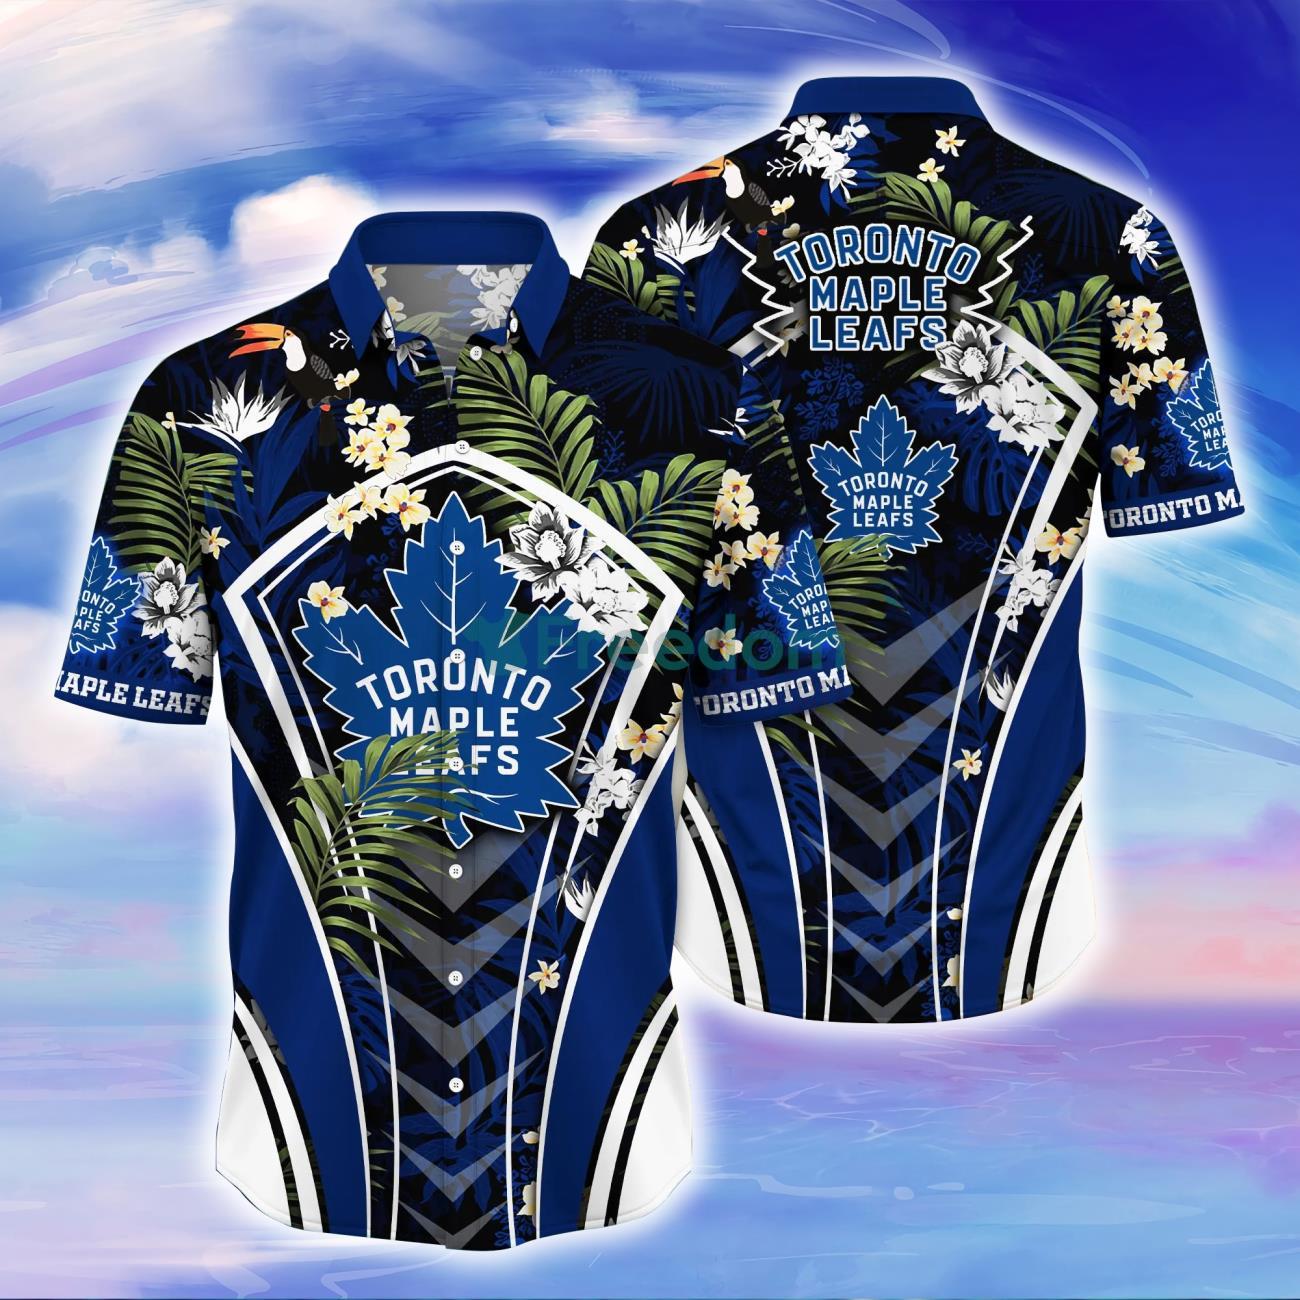 Toronto Maple Leafs Leather Jacket gift for fans -Jack sport shop